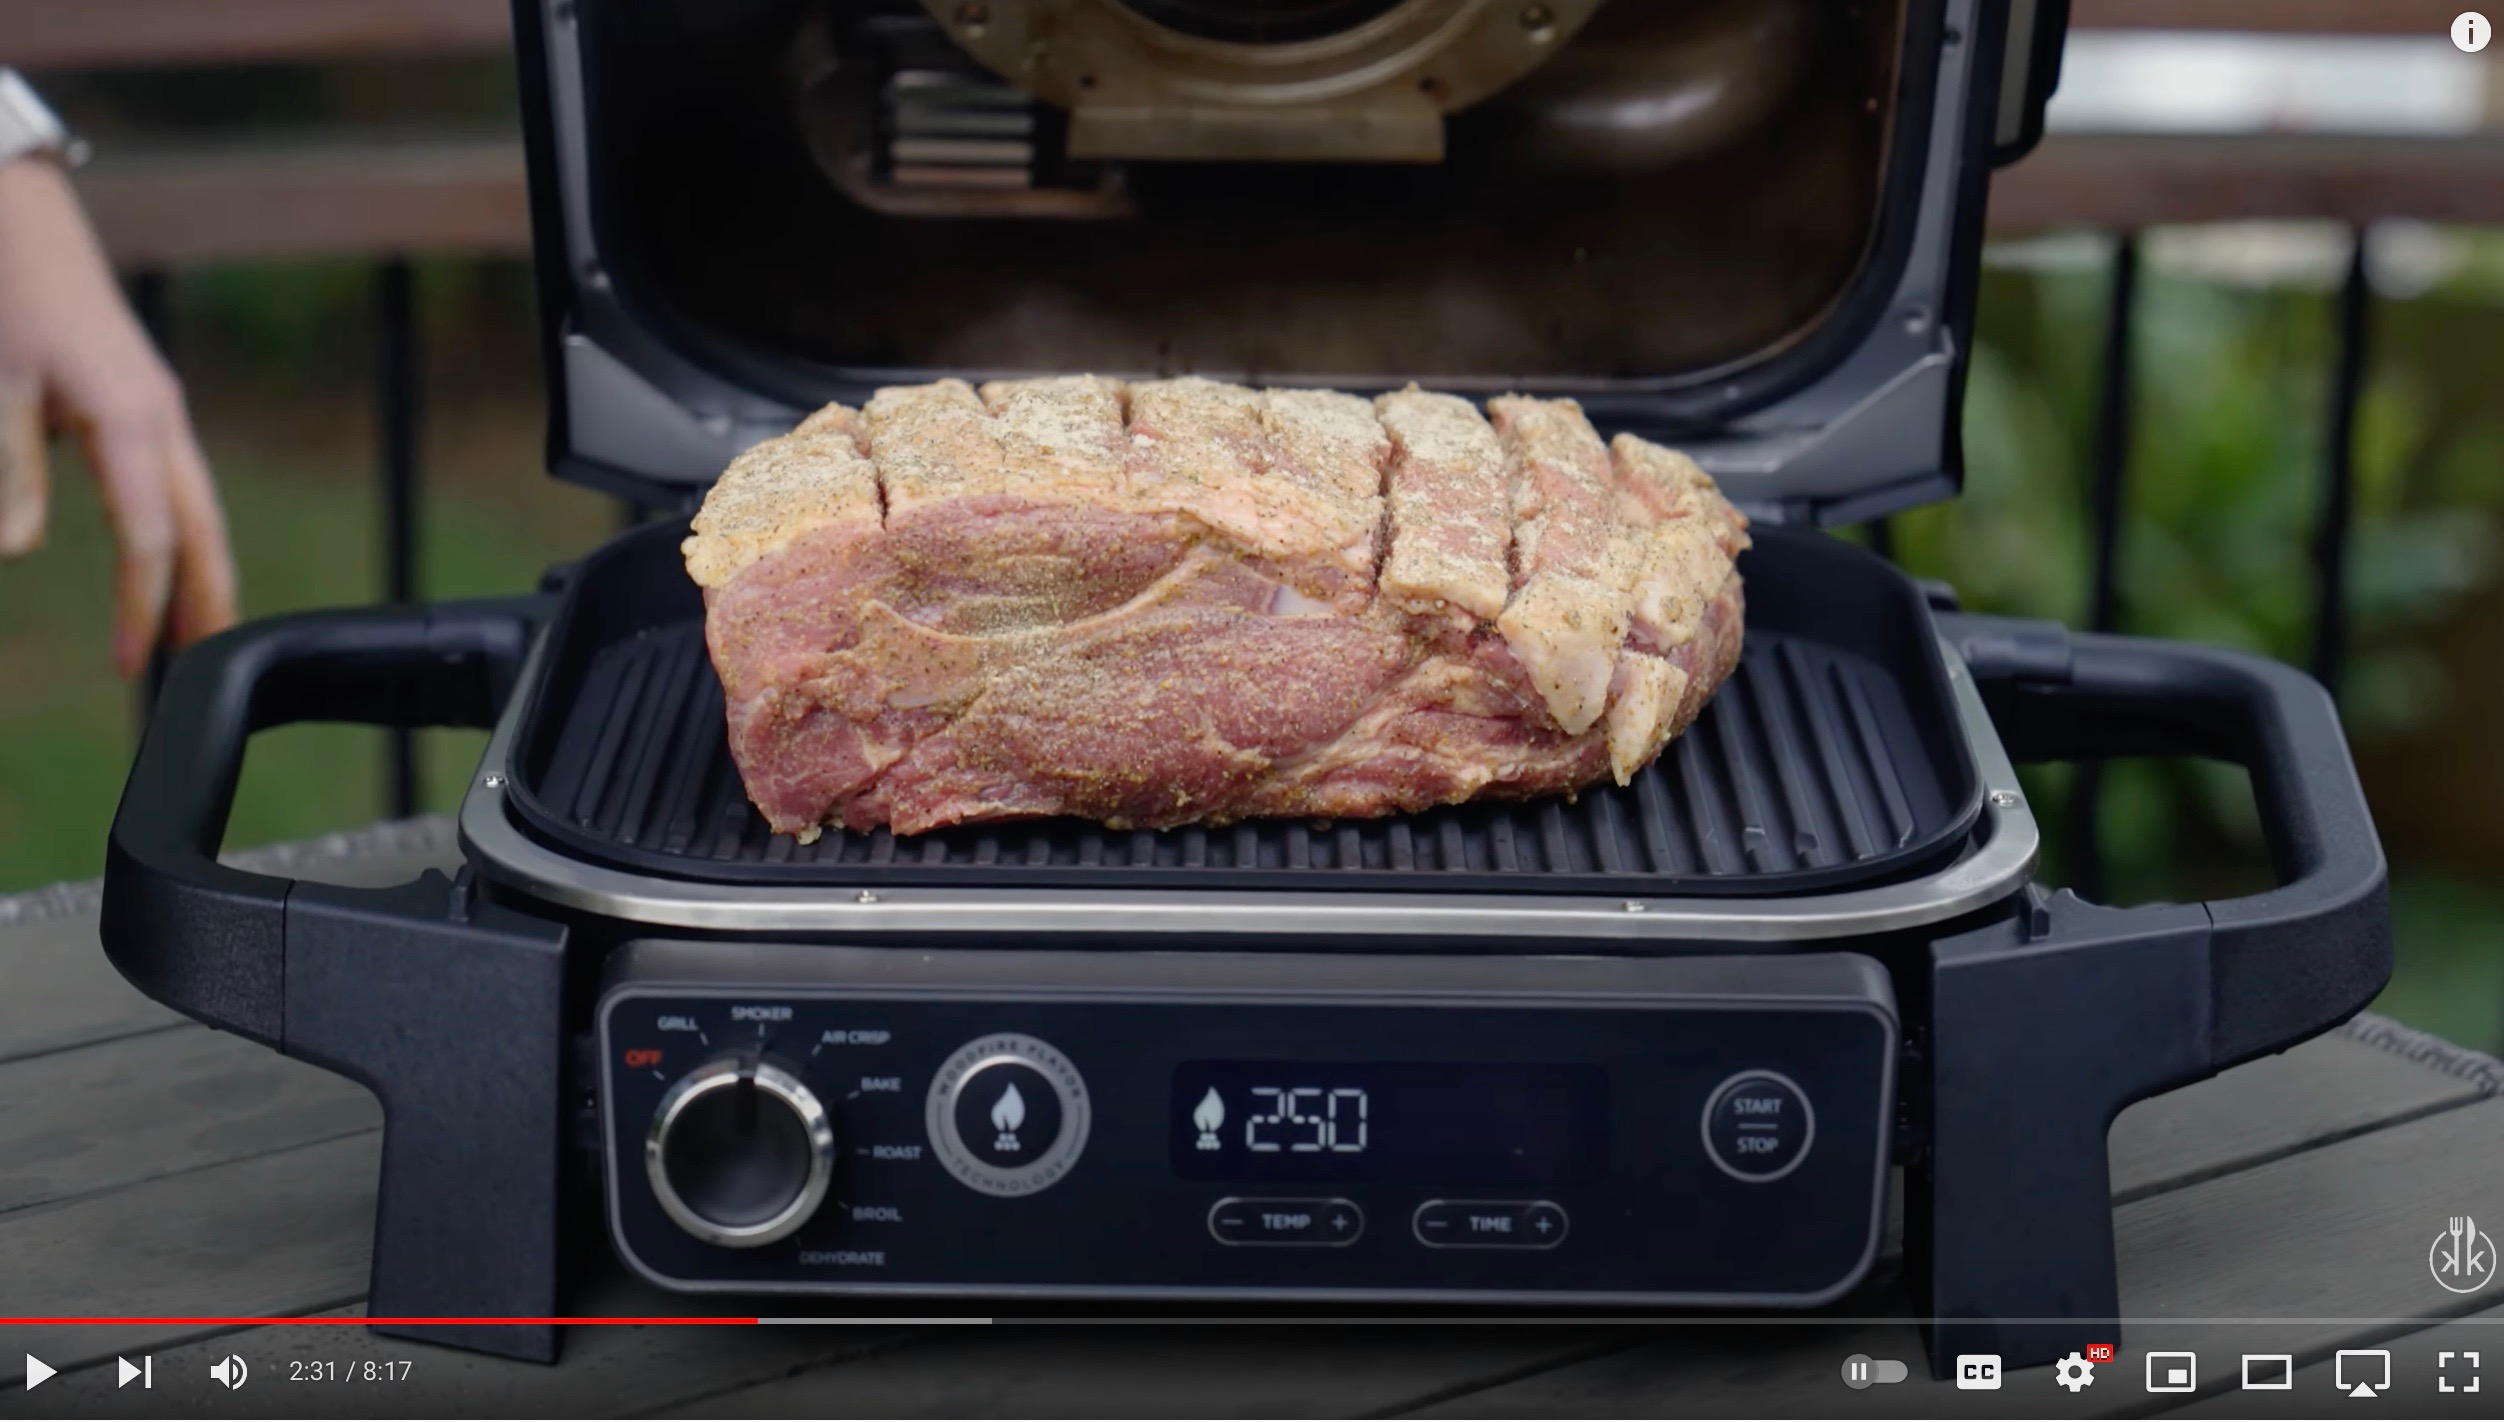 The Ninja Foodi XL Pro indoor grill is perfect for apartment